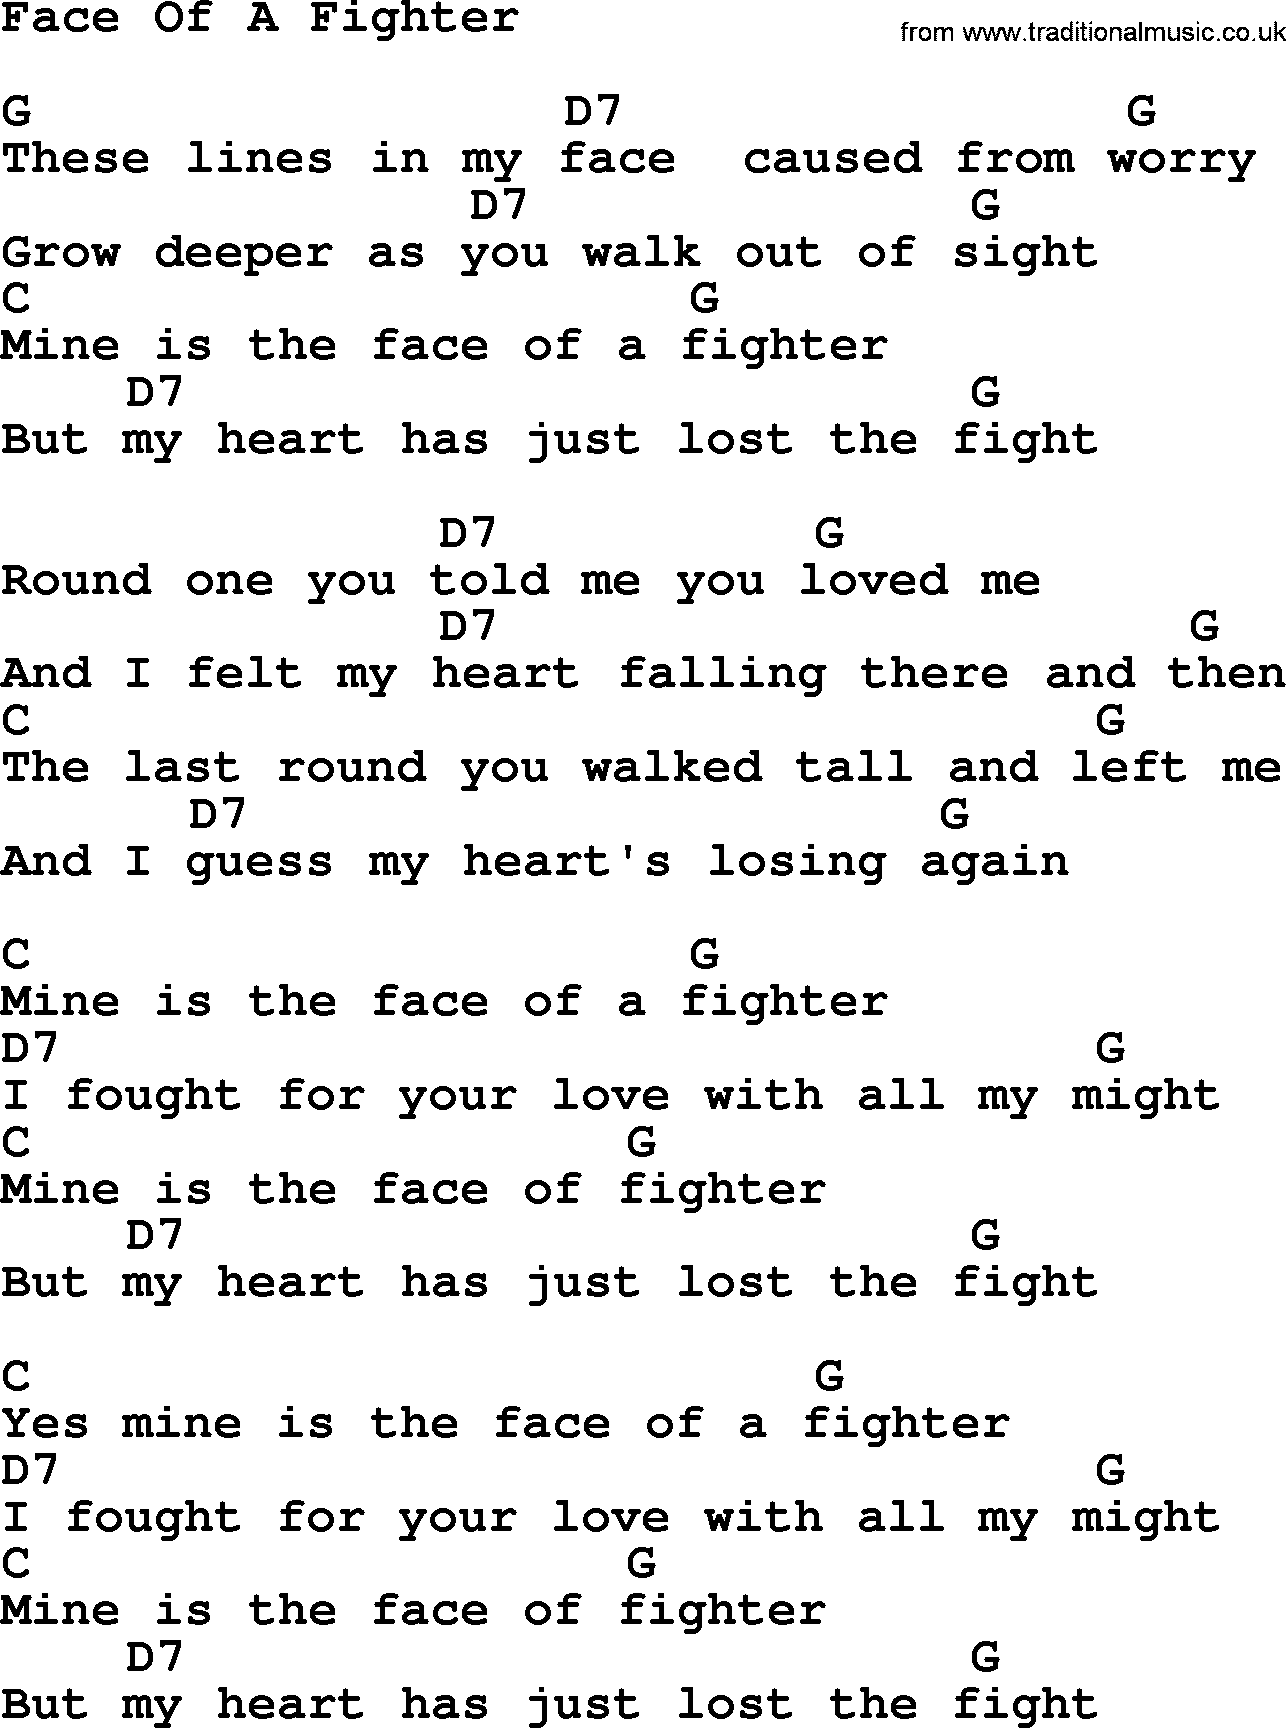 Willie Nelson song: Face Of A Fighter, lyrics and chords